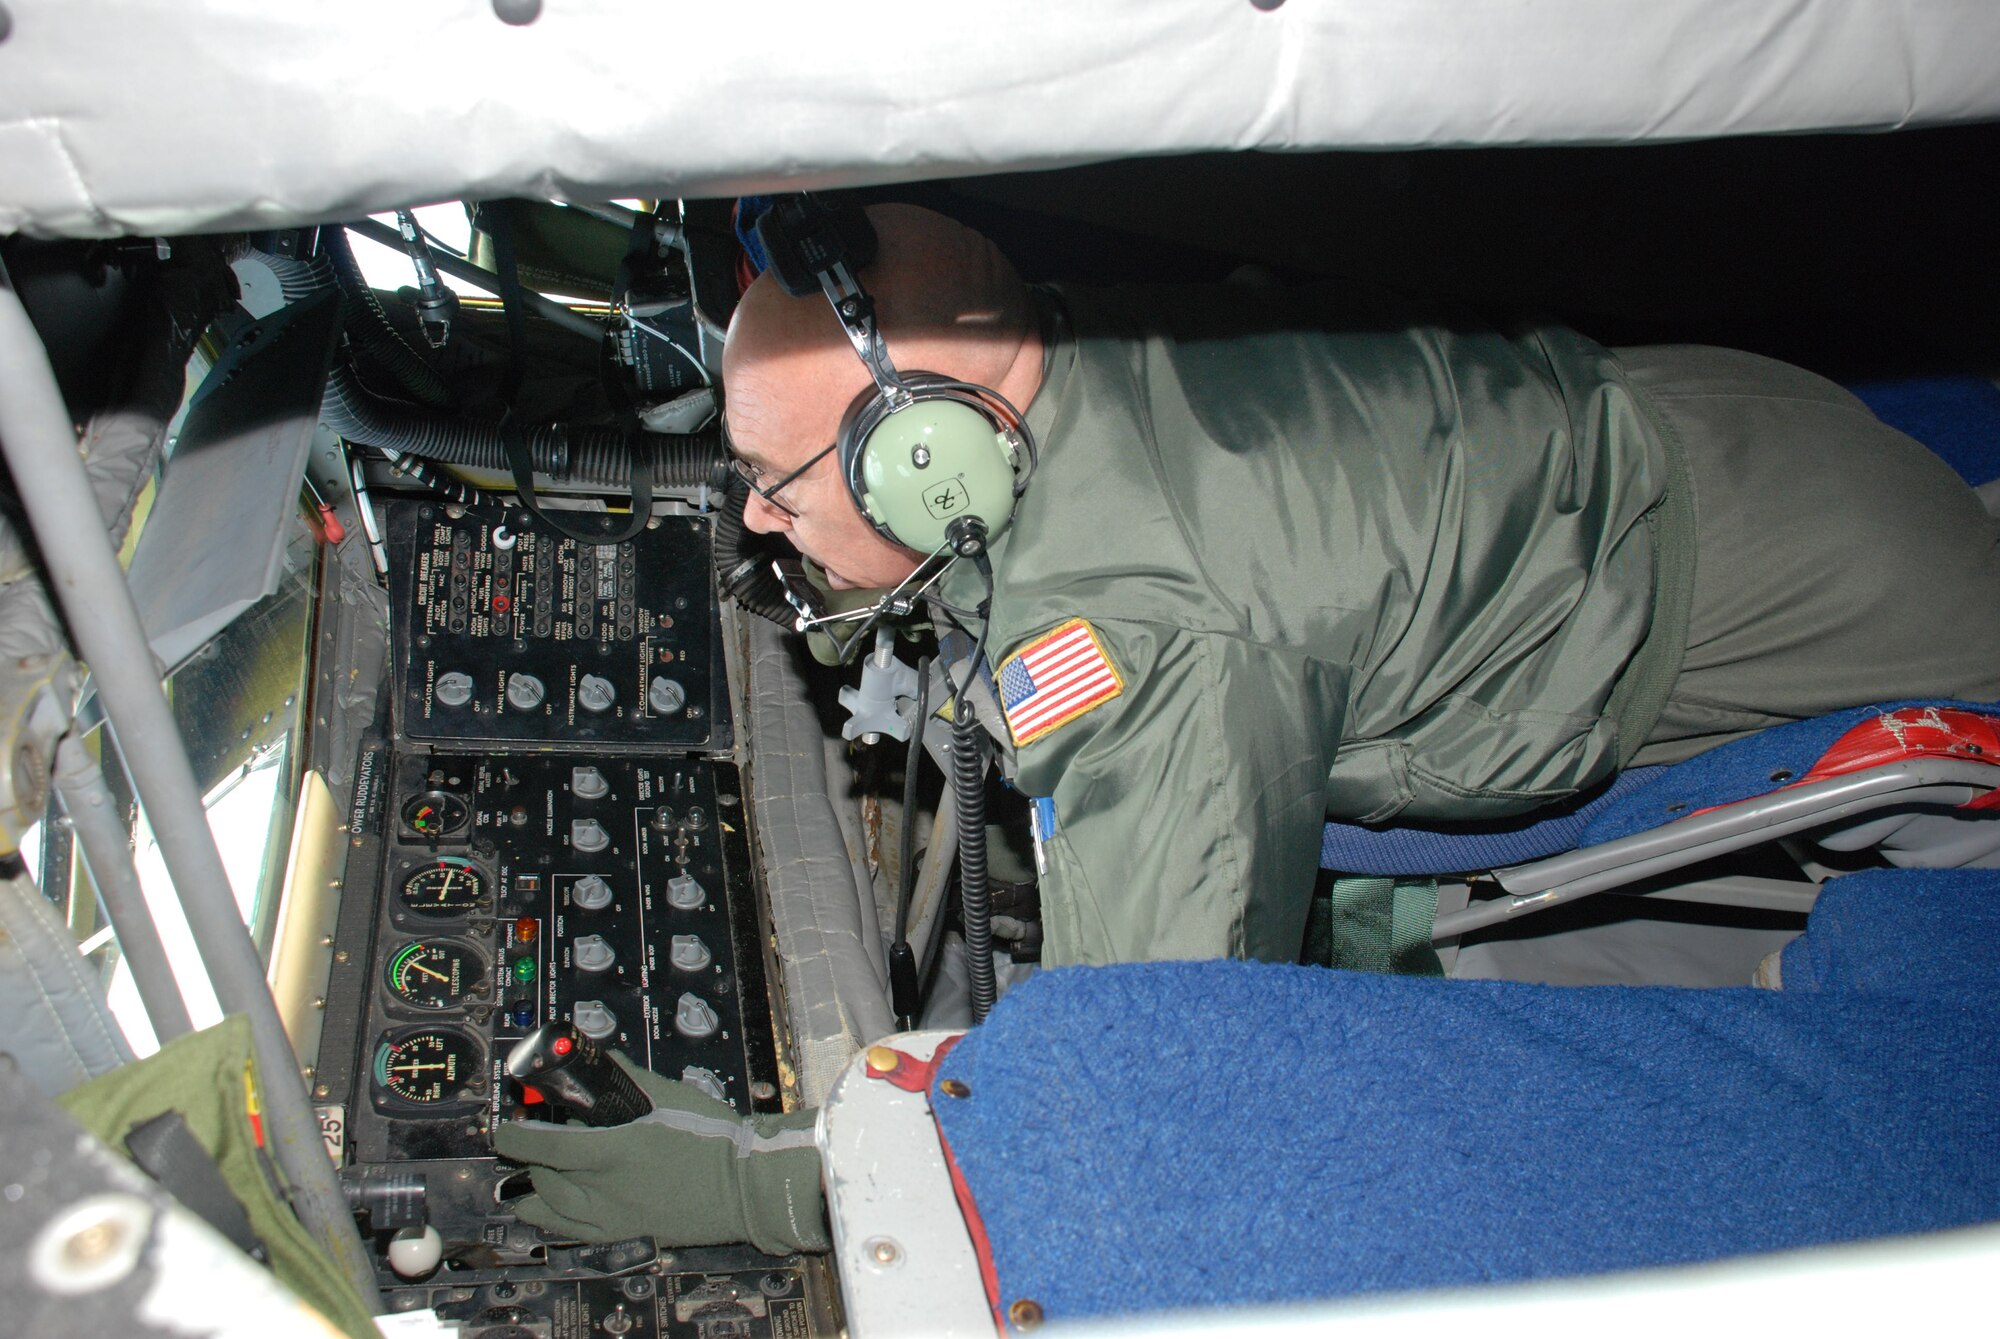 Master Sgt. Jim Sievert, 107th Airlift Wing, Boomer, refuels a KC-10 over the Atlantic Ocean on a training mission April 12.  This type of training is done to keep the pilots of both aircraft and the boomer current. (Photo by Staff Sgt. Rebecca Kenyon, USAF)